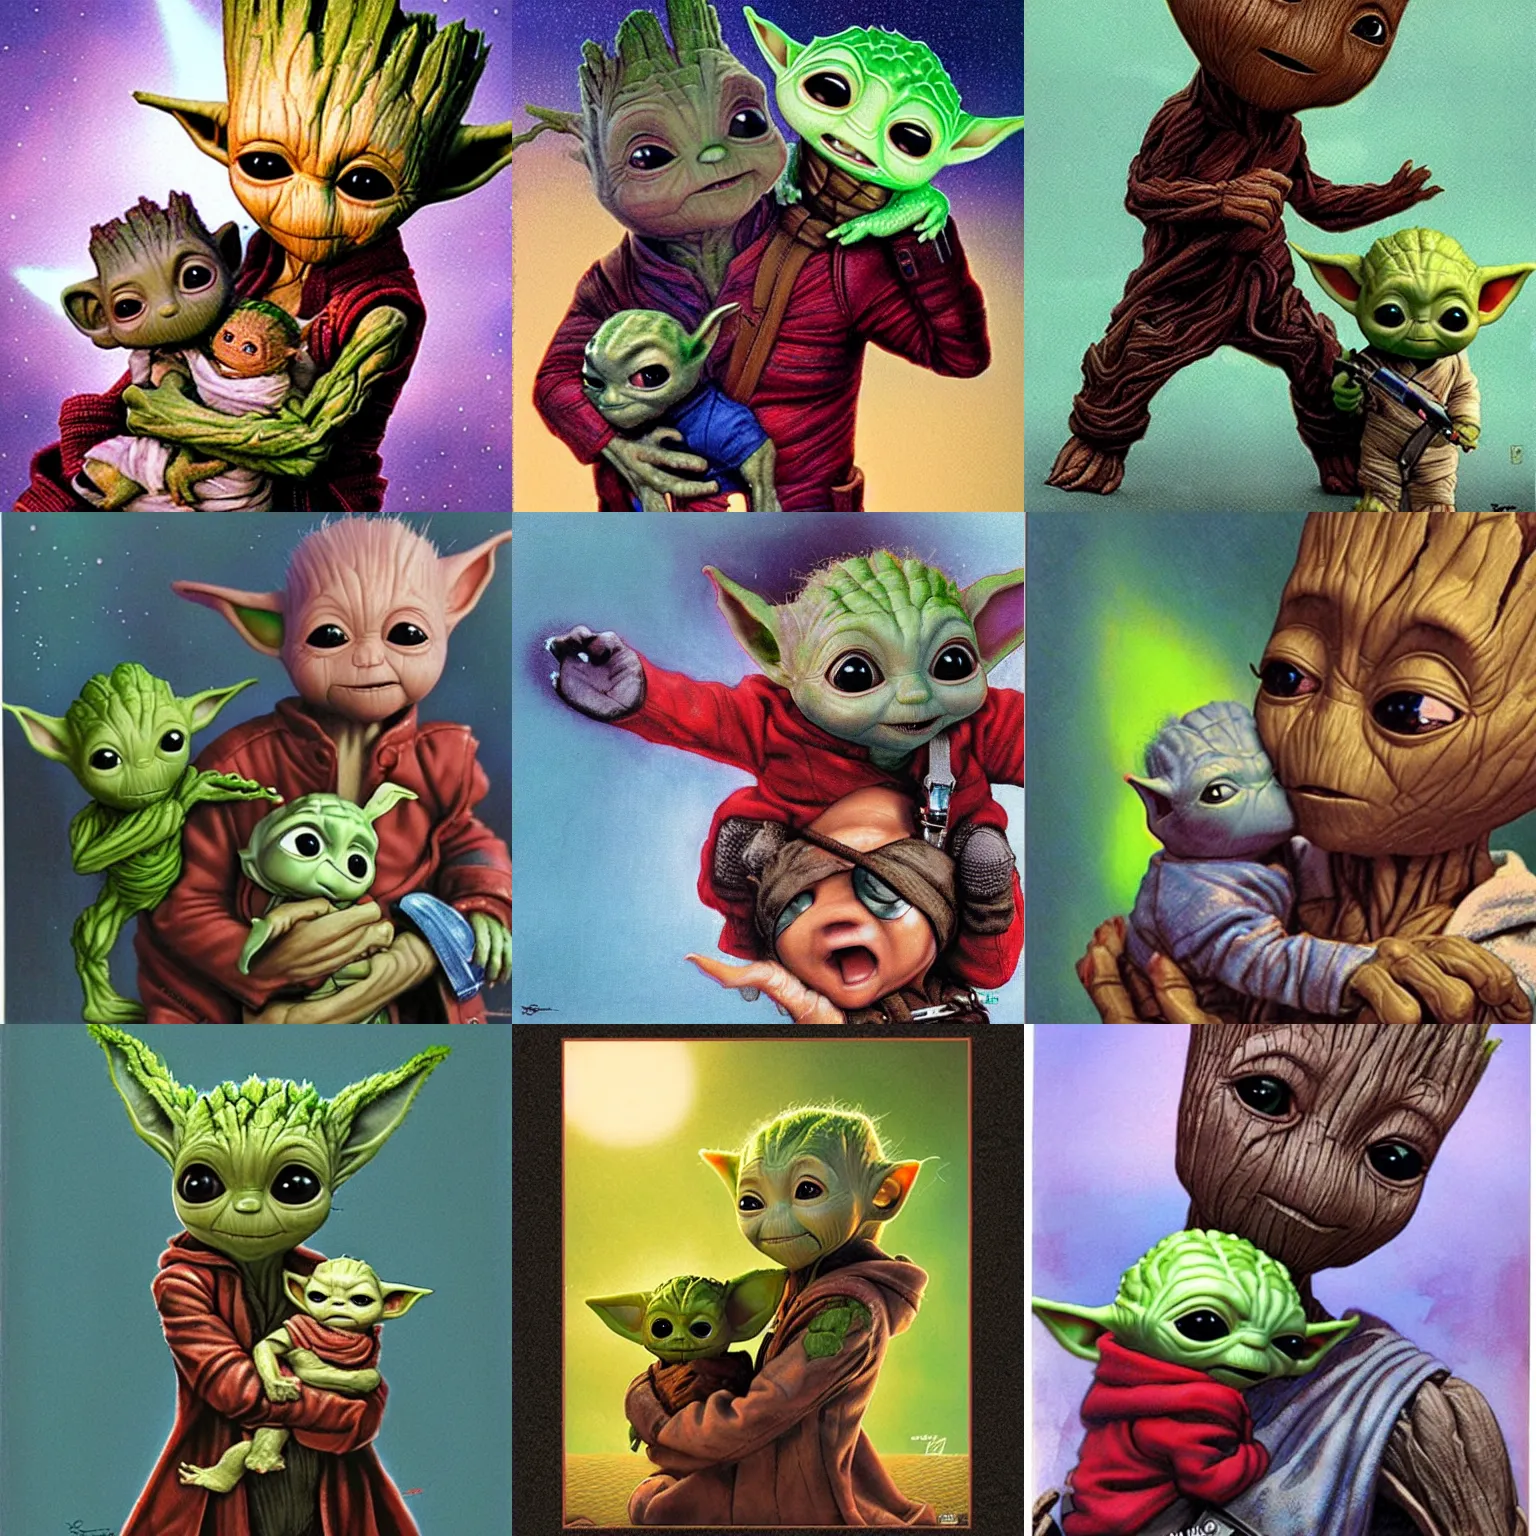 Prompt: baby groot holding baby yoda in his arms by drew struzan